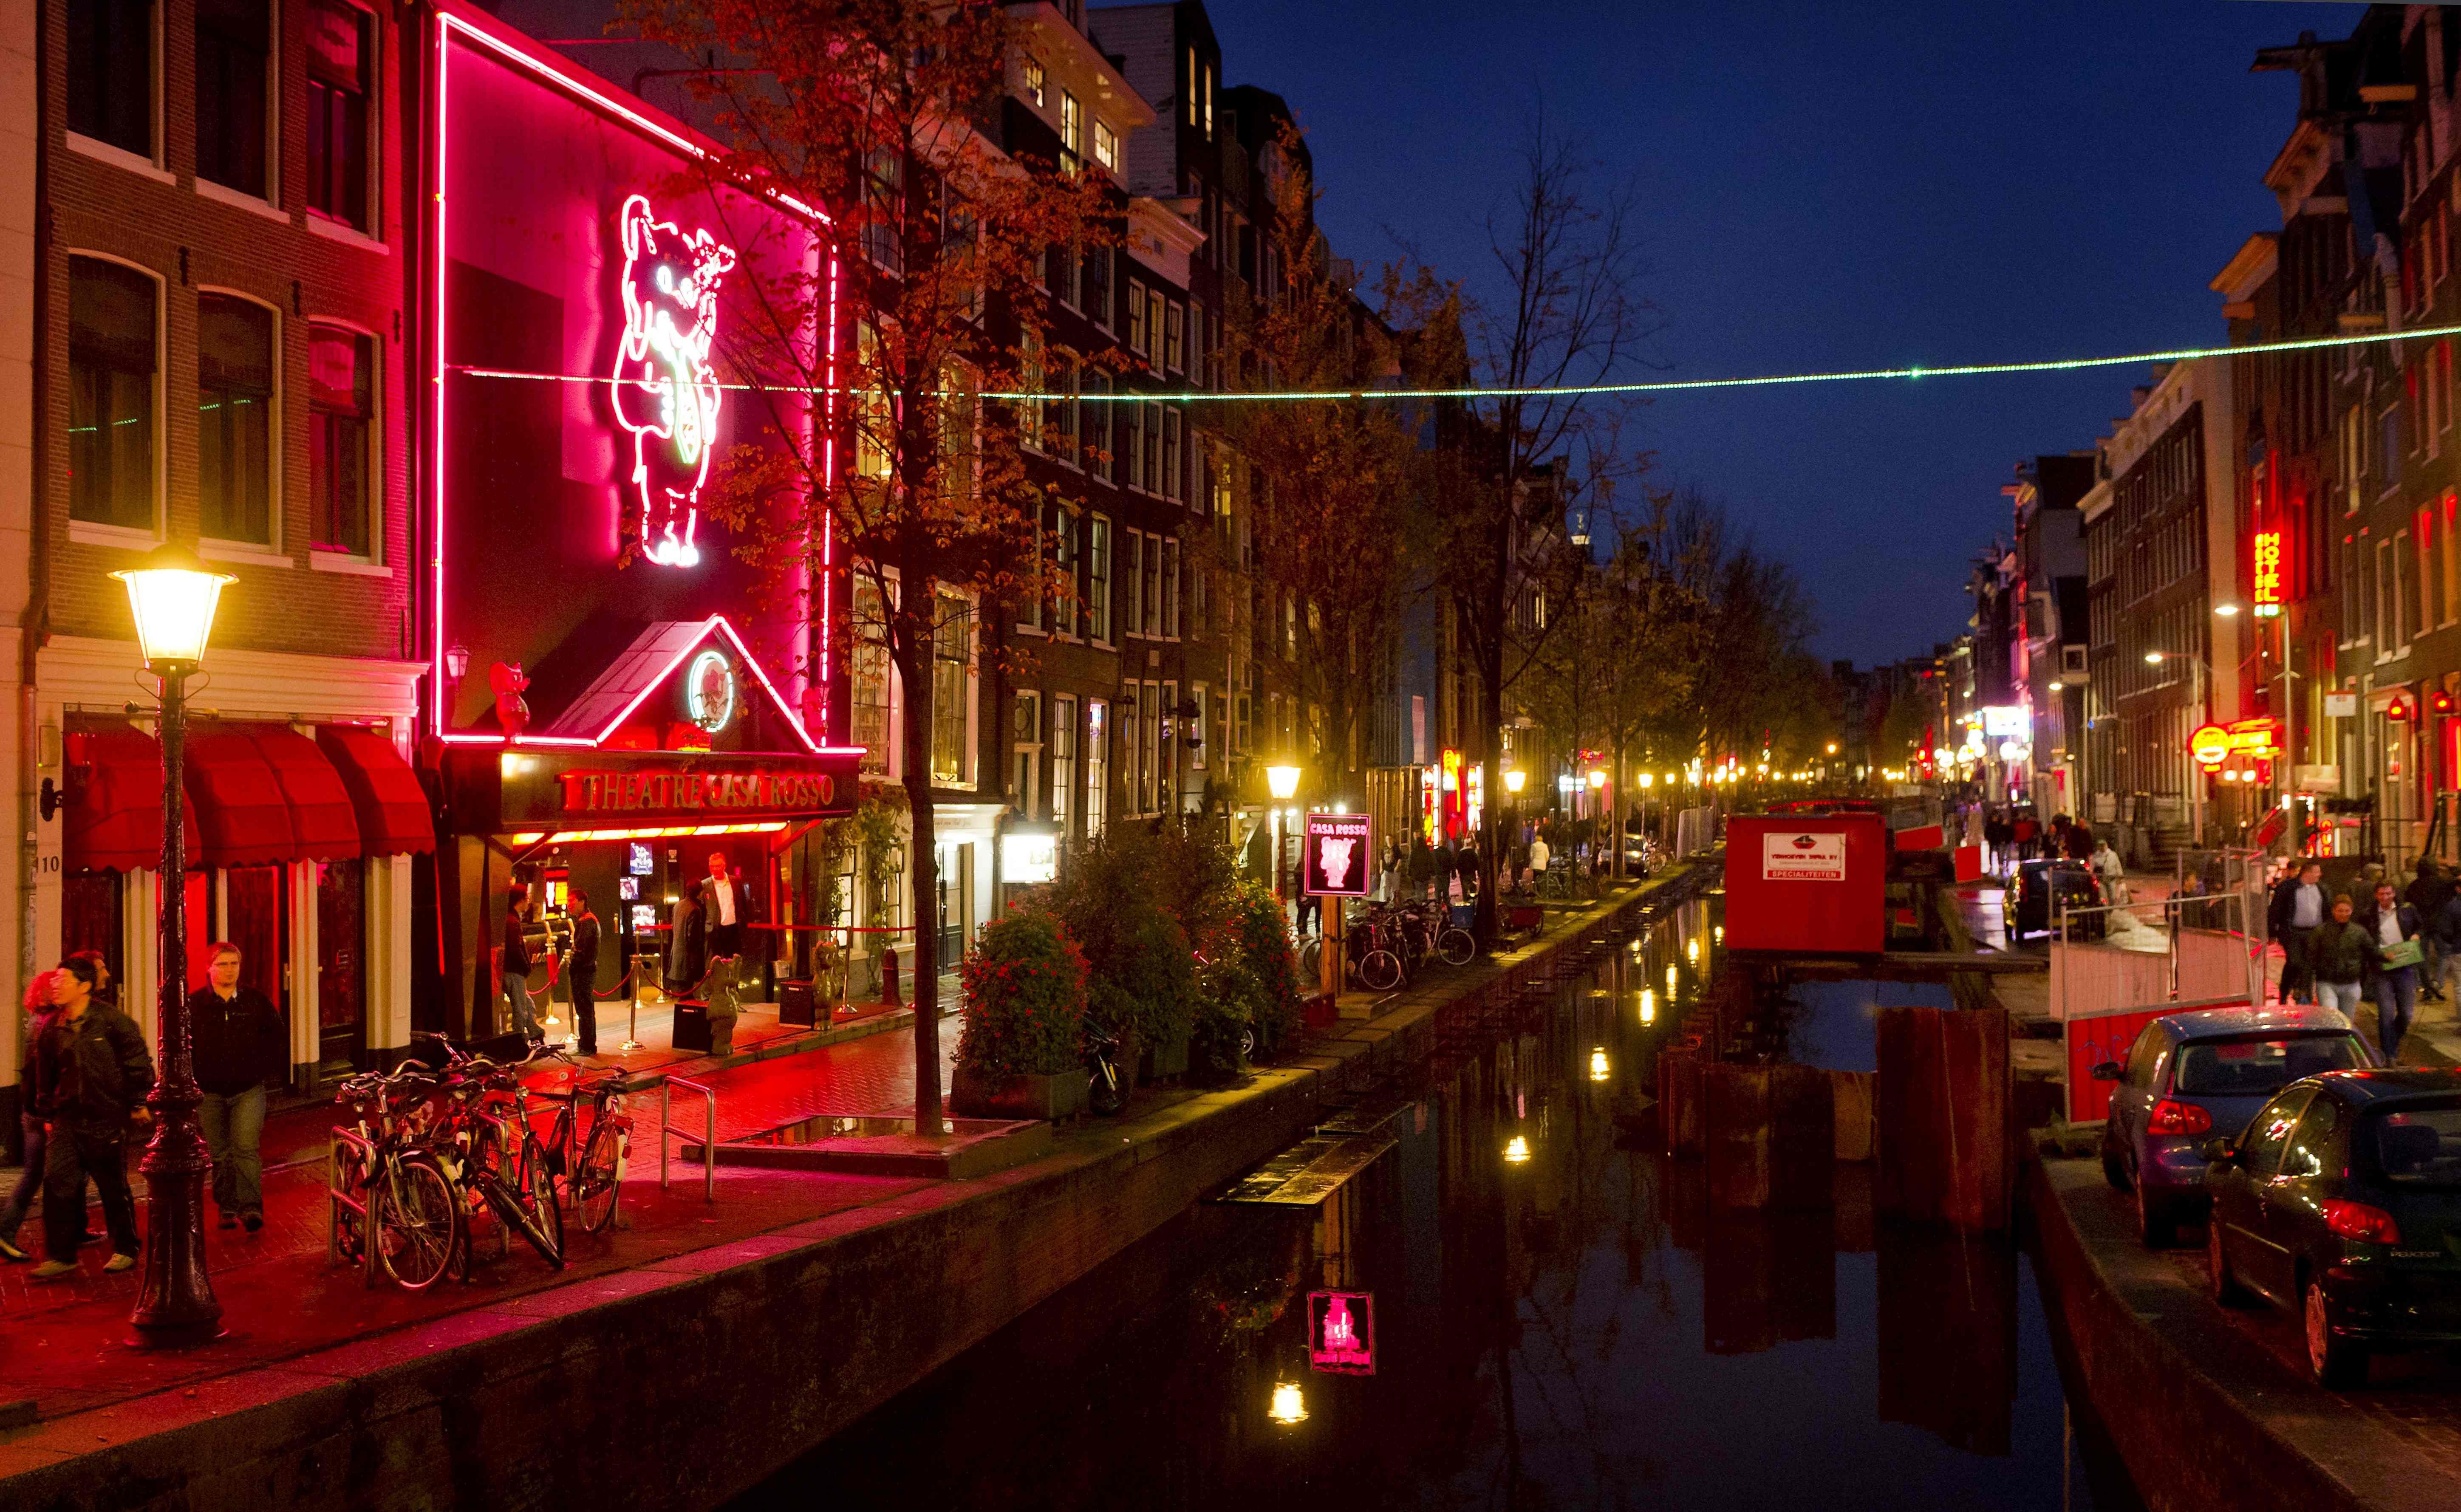 Mince give lindre Amsterdam could move parts of iconic red light district into indoor 'erotic  centre' | South China Morning Post